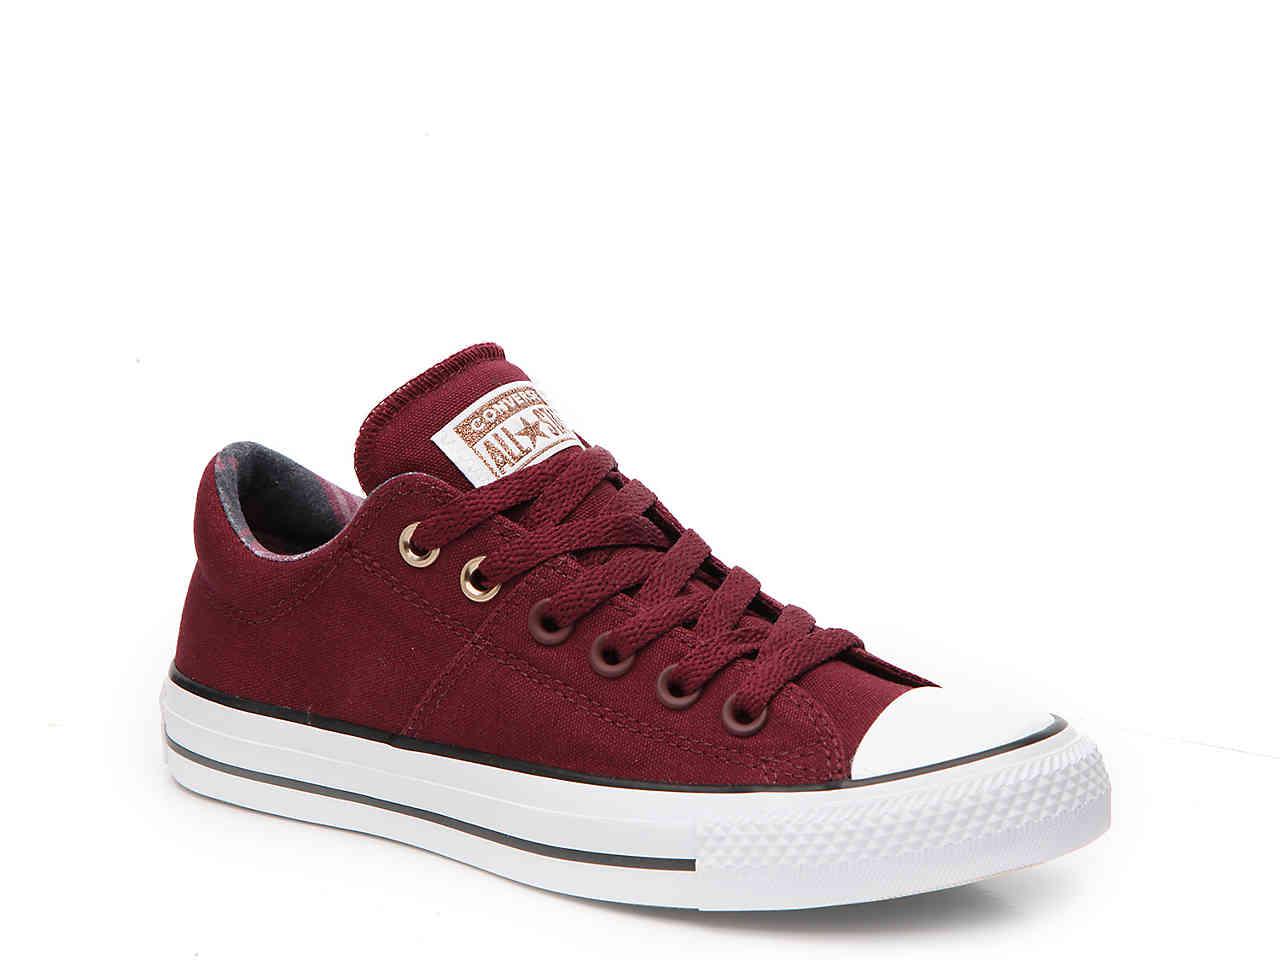 Converse Chuck Taylor All Star Madison Sneaker in Red | Lyst